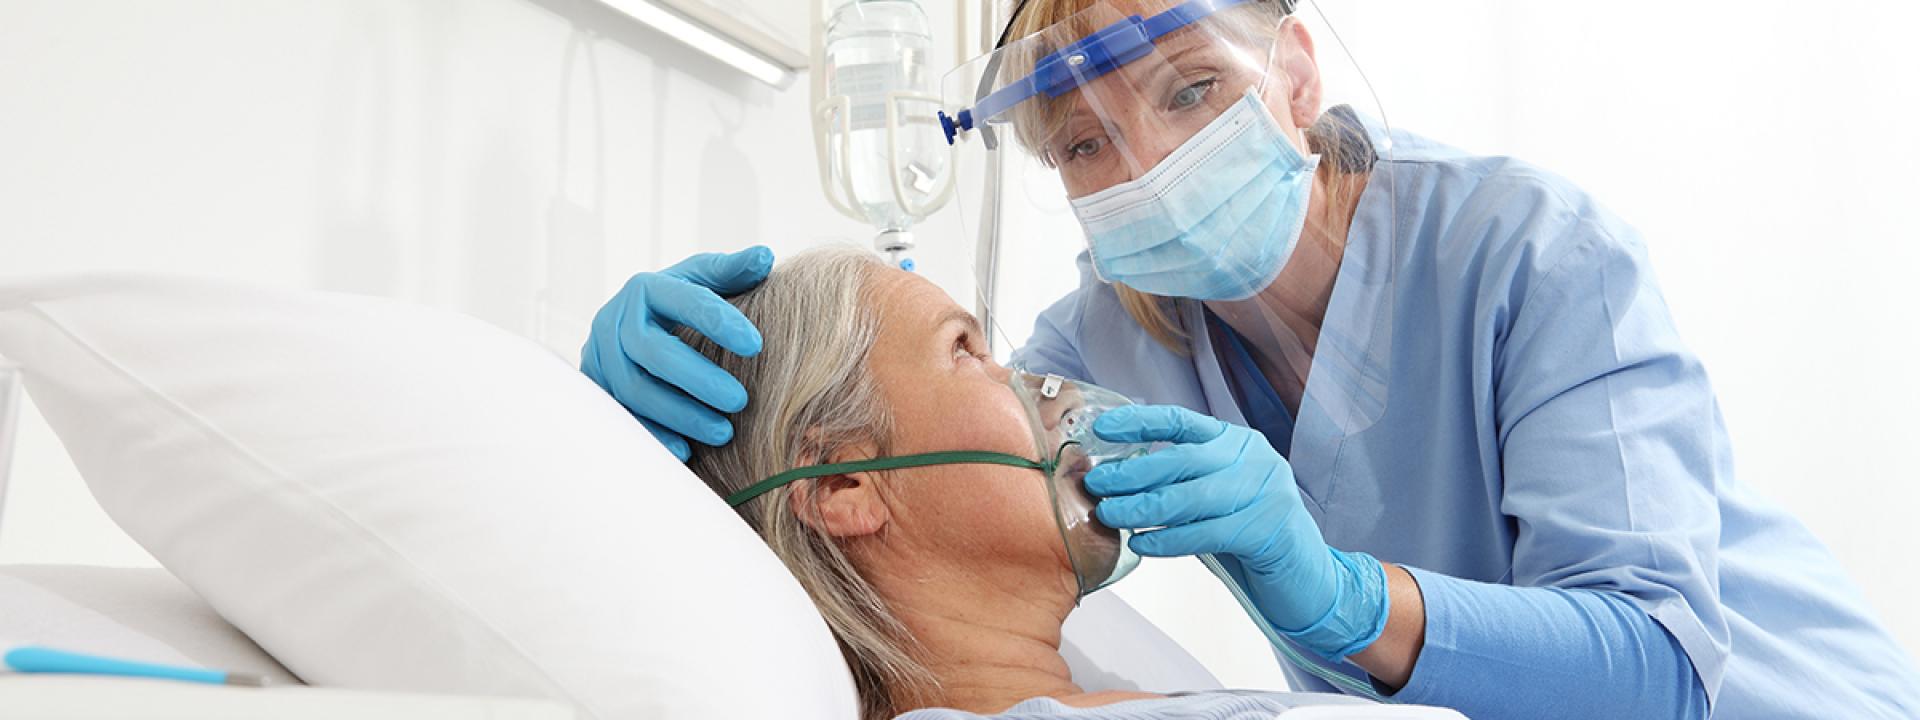 a respiratory therapist places an oxygen mask on an elderly patient in a hospital bed. 